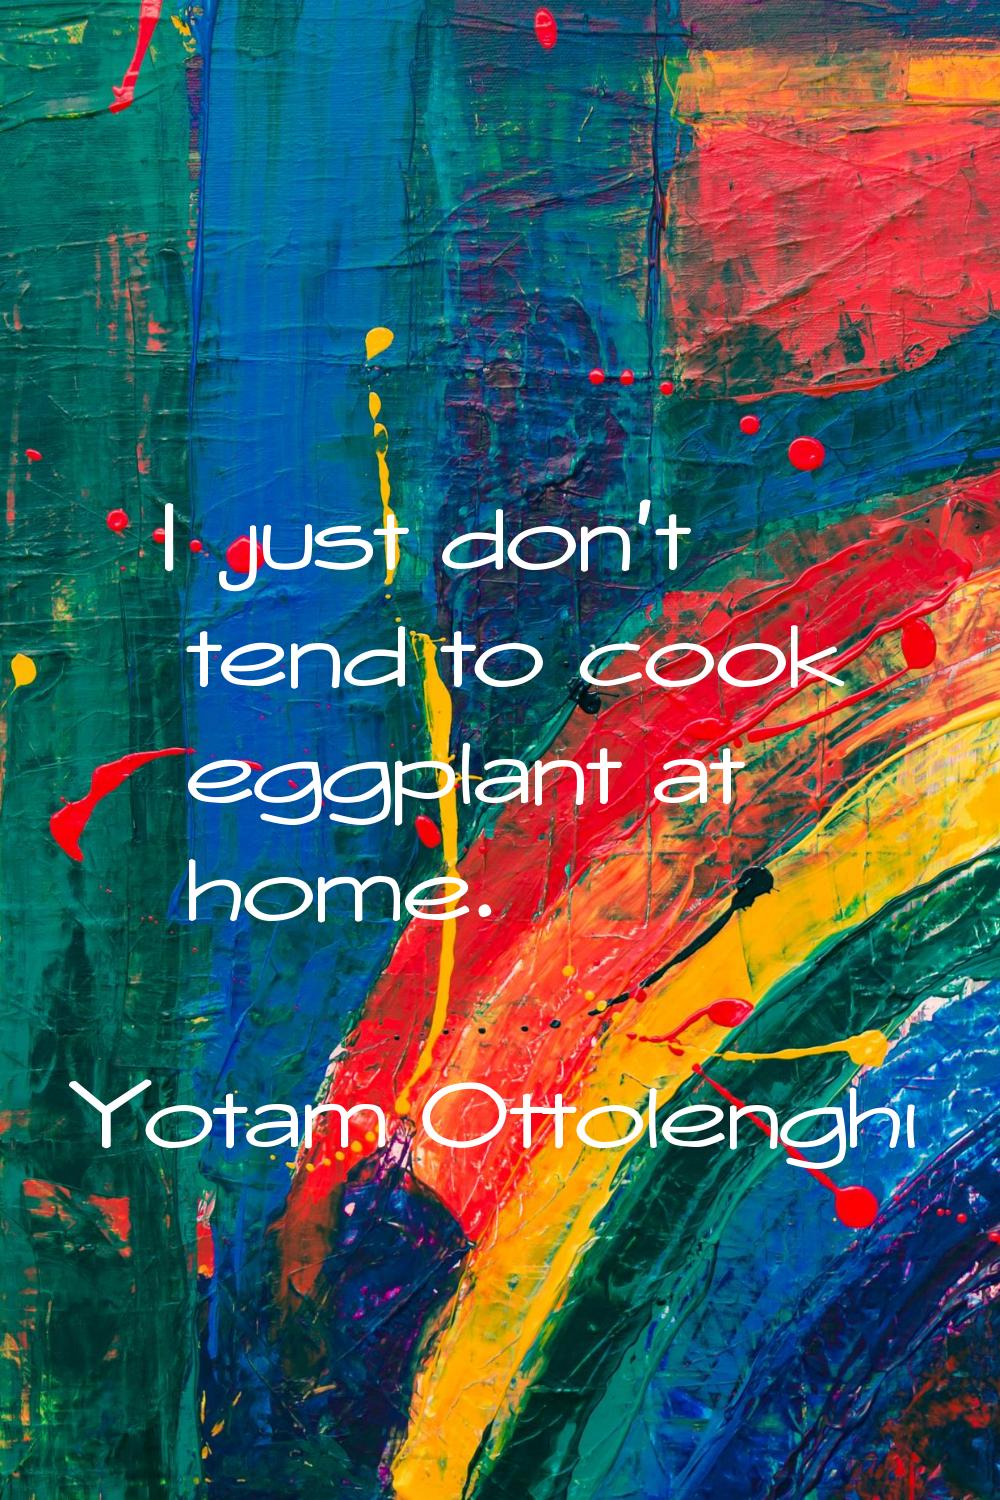 I just don't tend to cook eggplant at home.